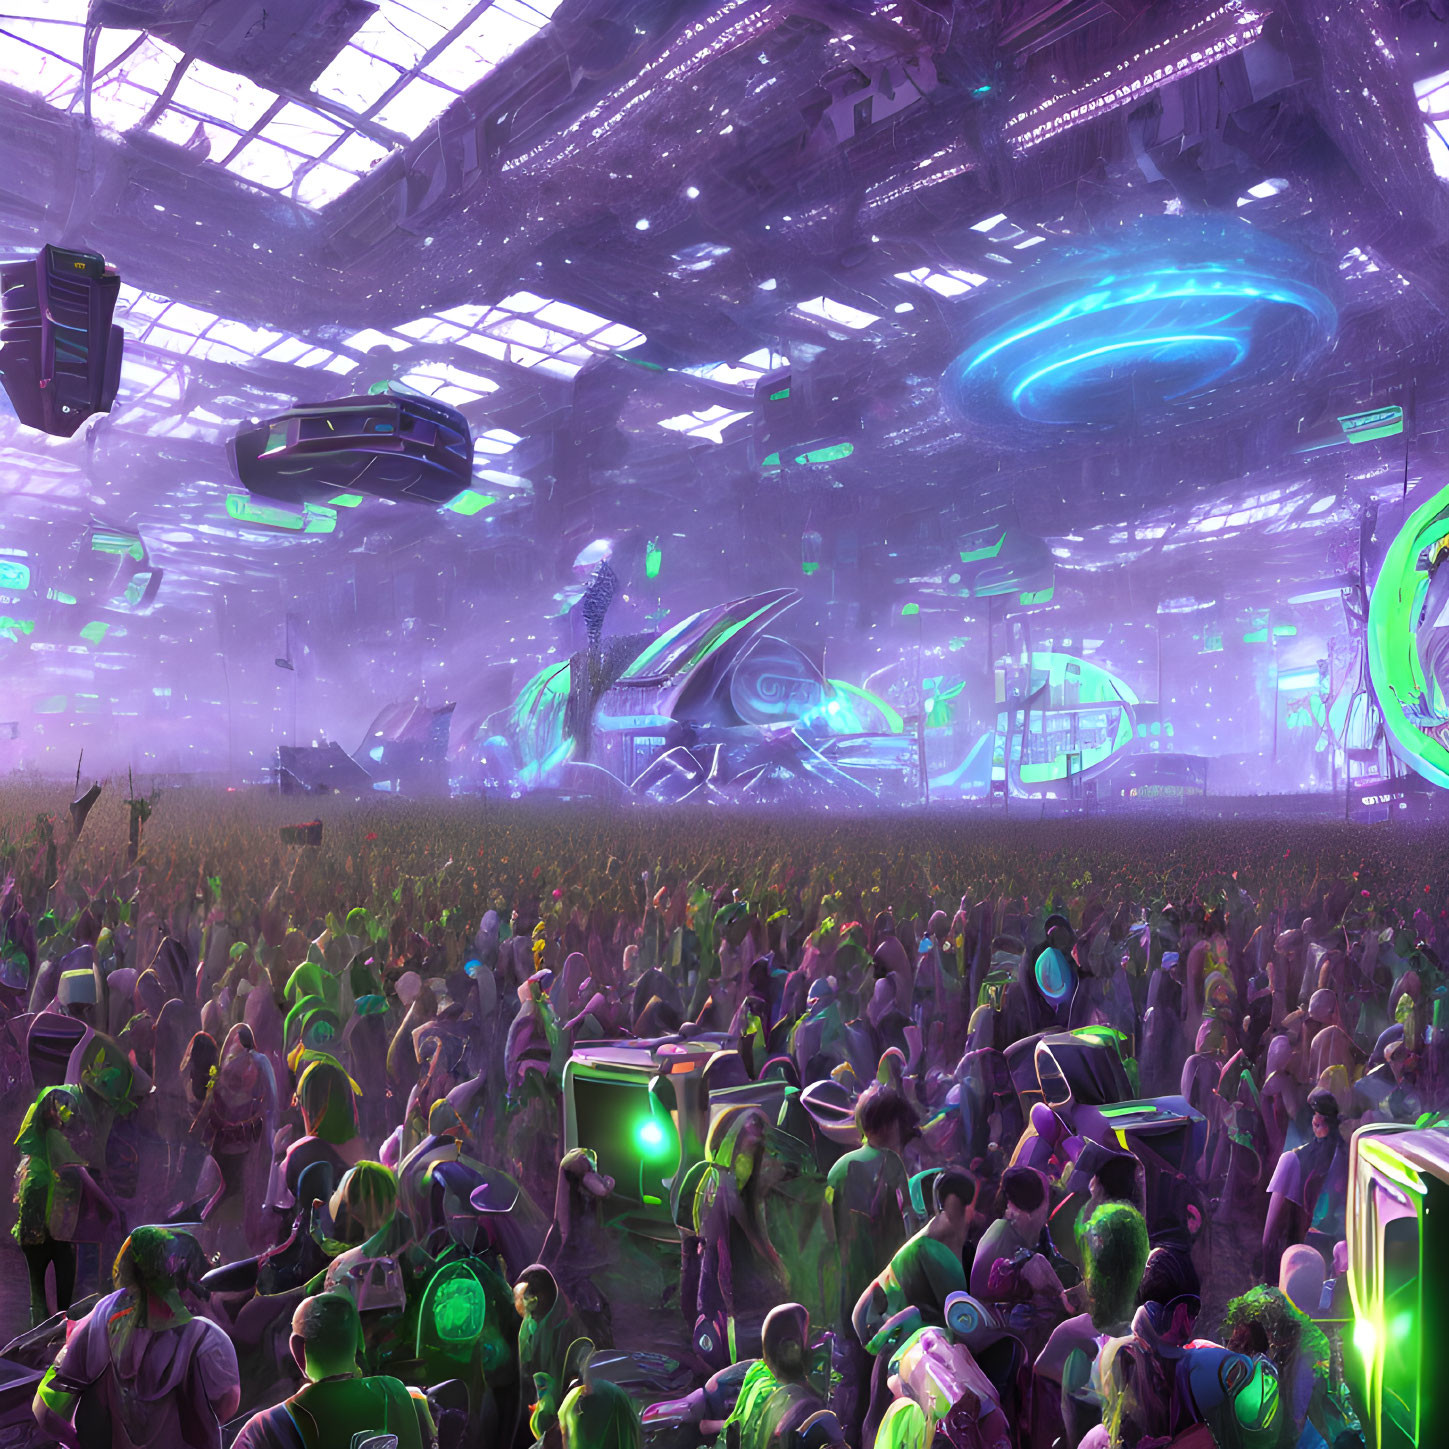 Alien-themed sci-fi concert with neon lighting and futuristic stages